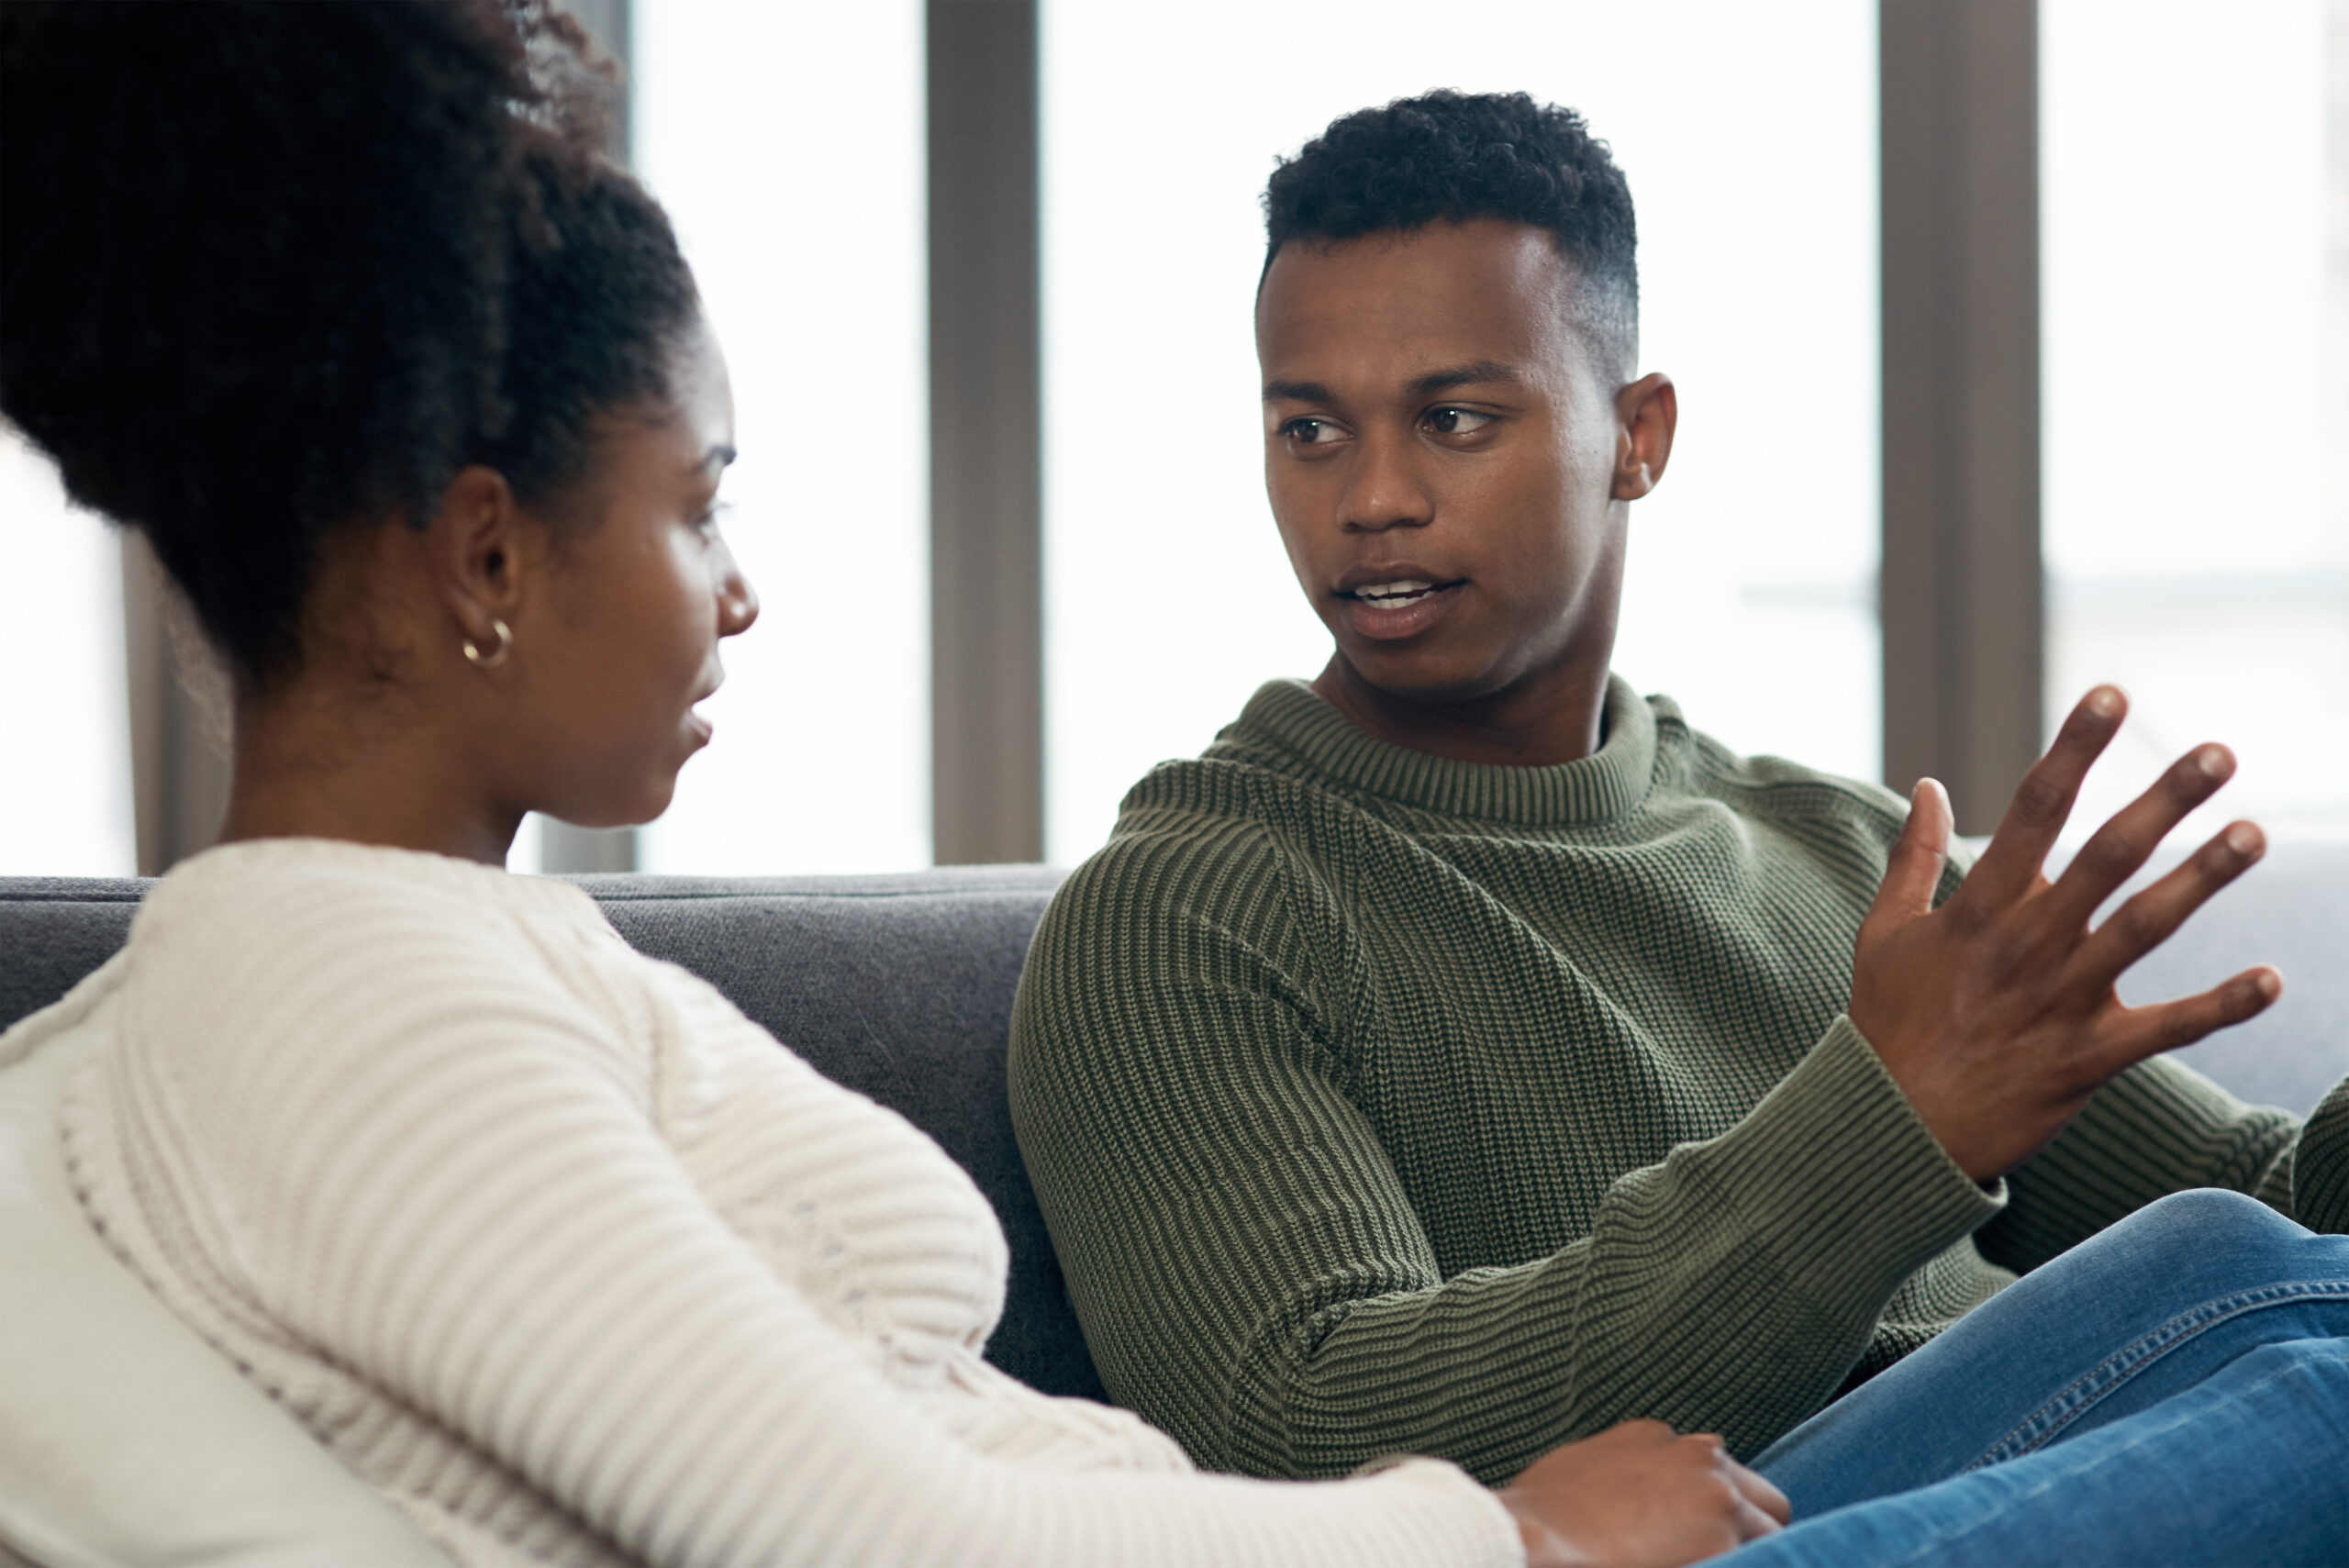 Therapist Shares Topics to Avoid and Address in New Relationships